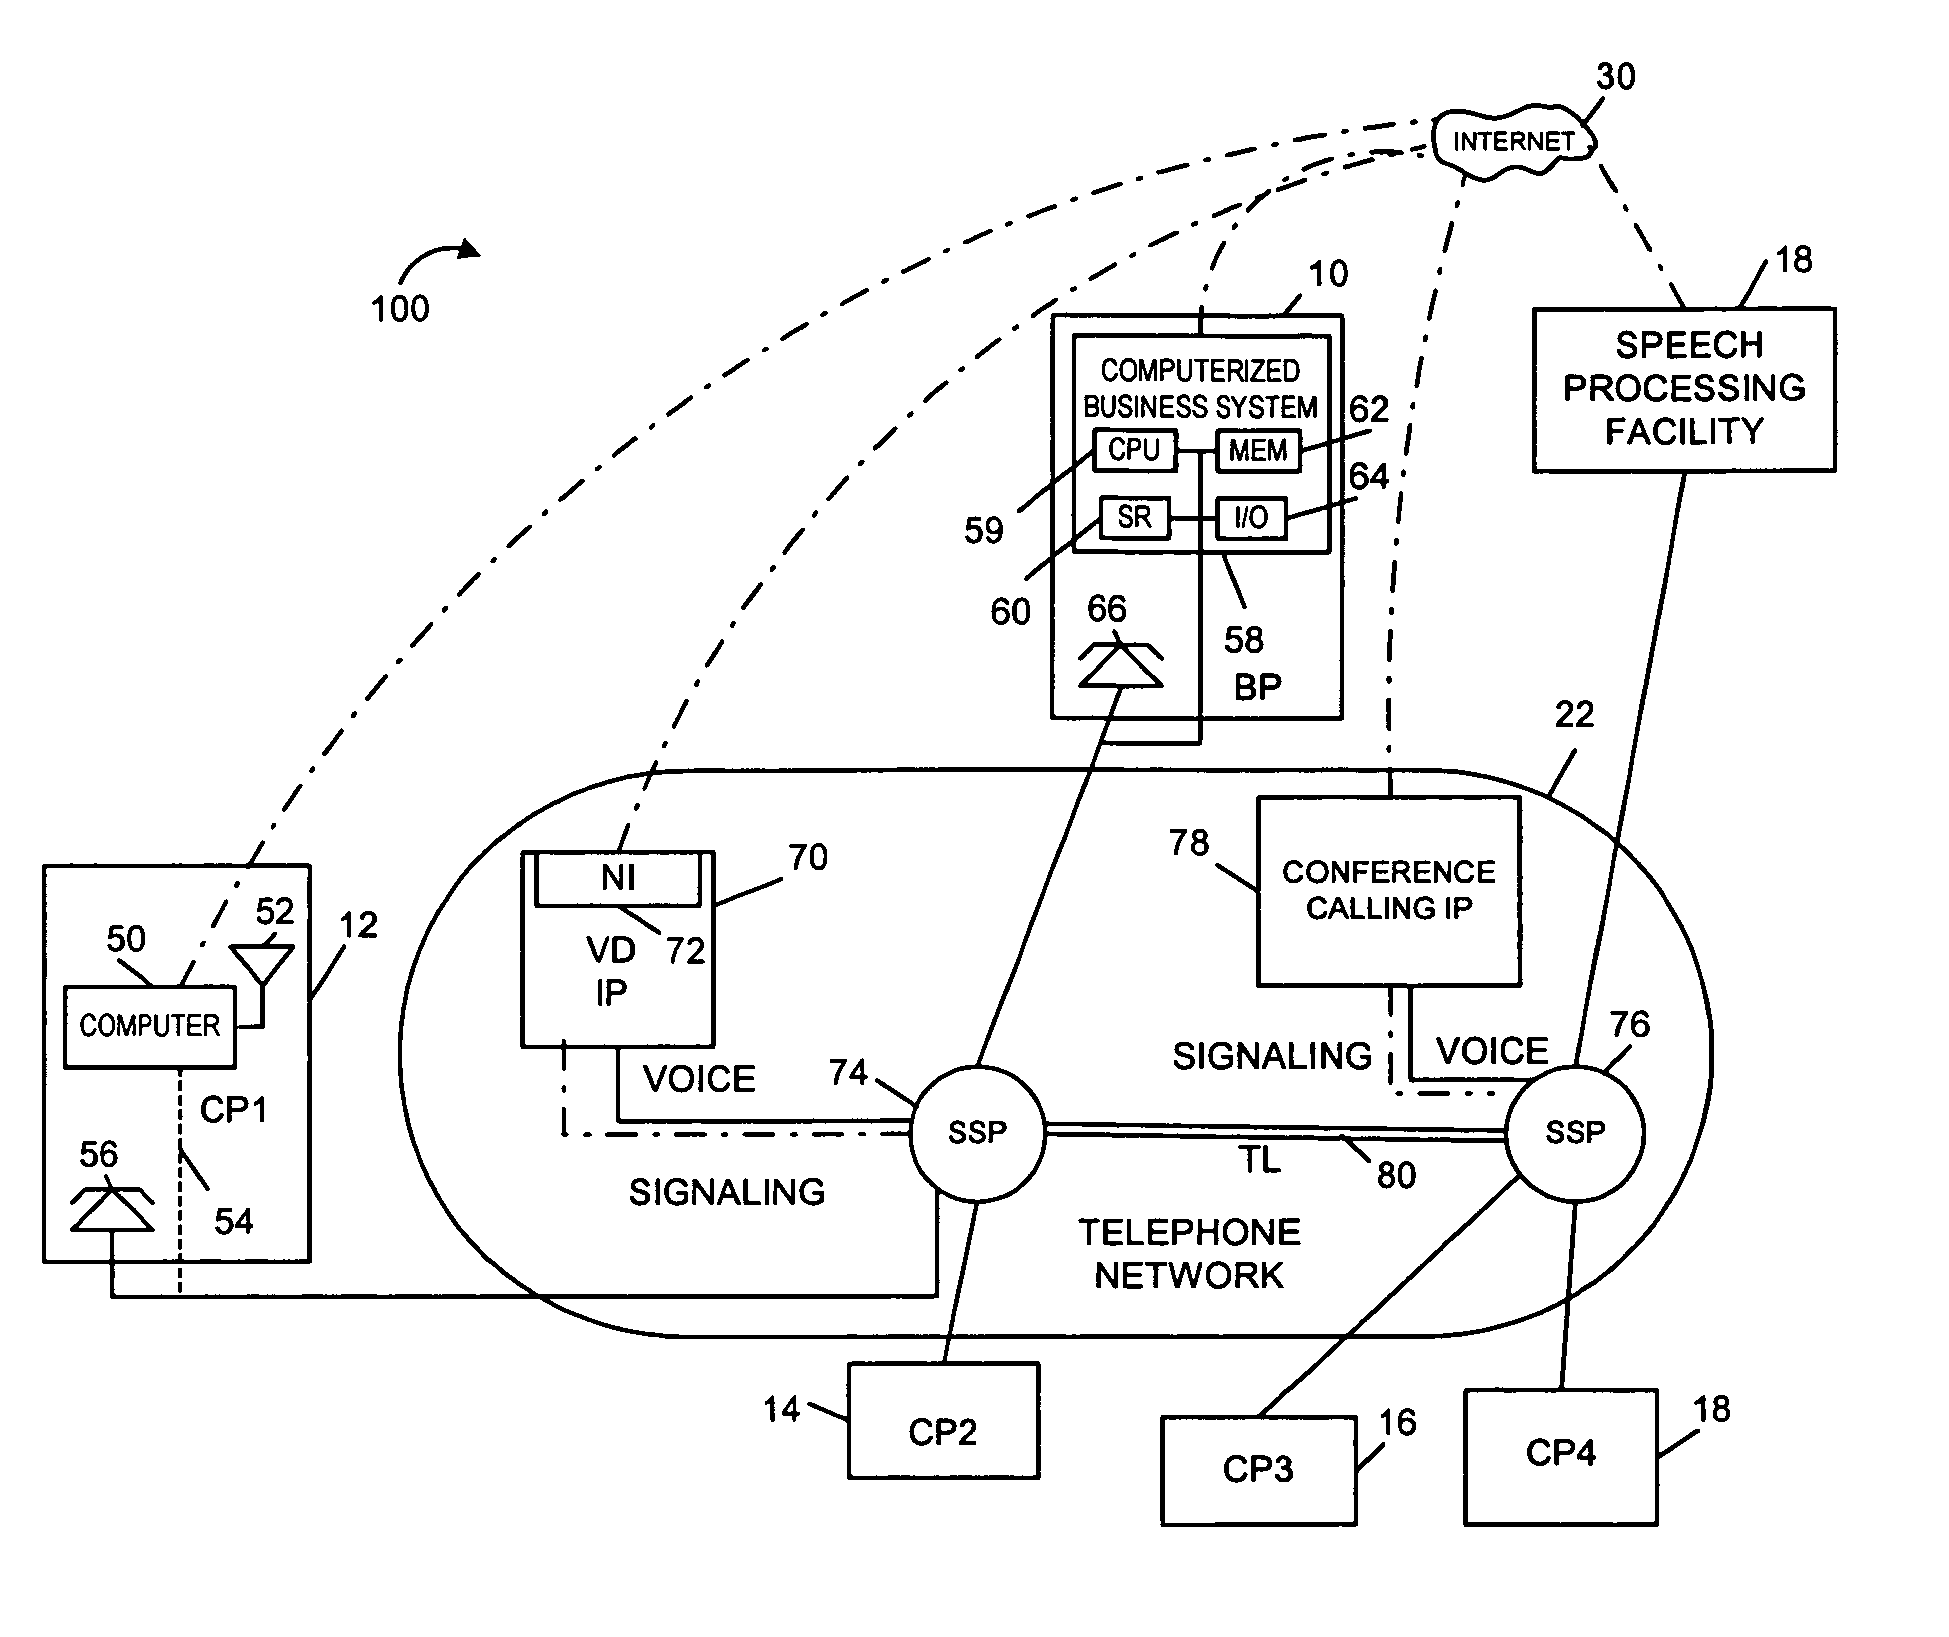 Methods and apparatus for performing speech recognition over a network and using speech recognition results